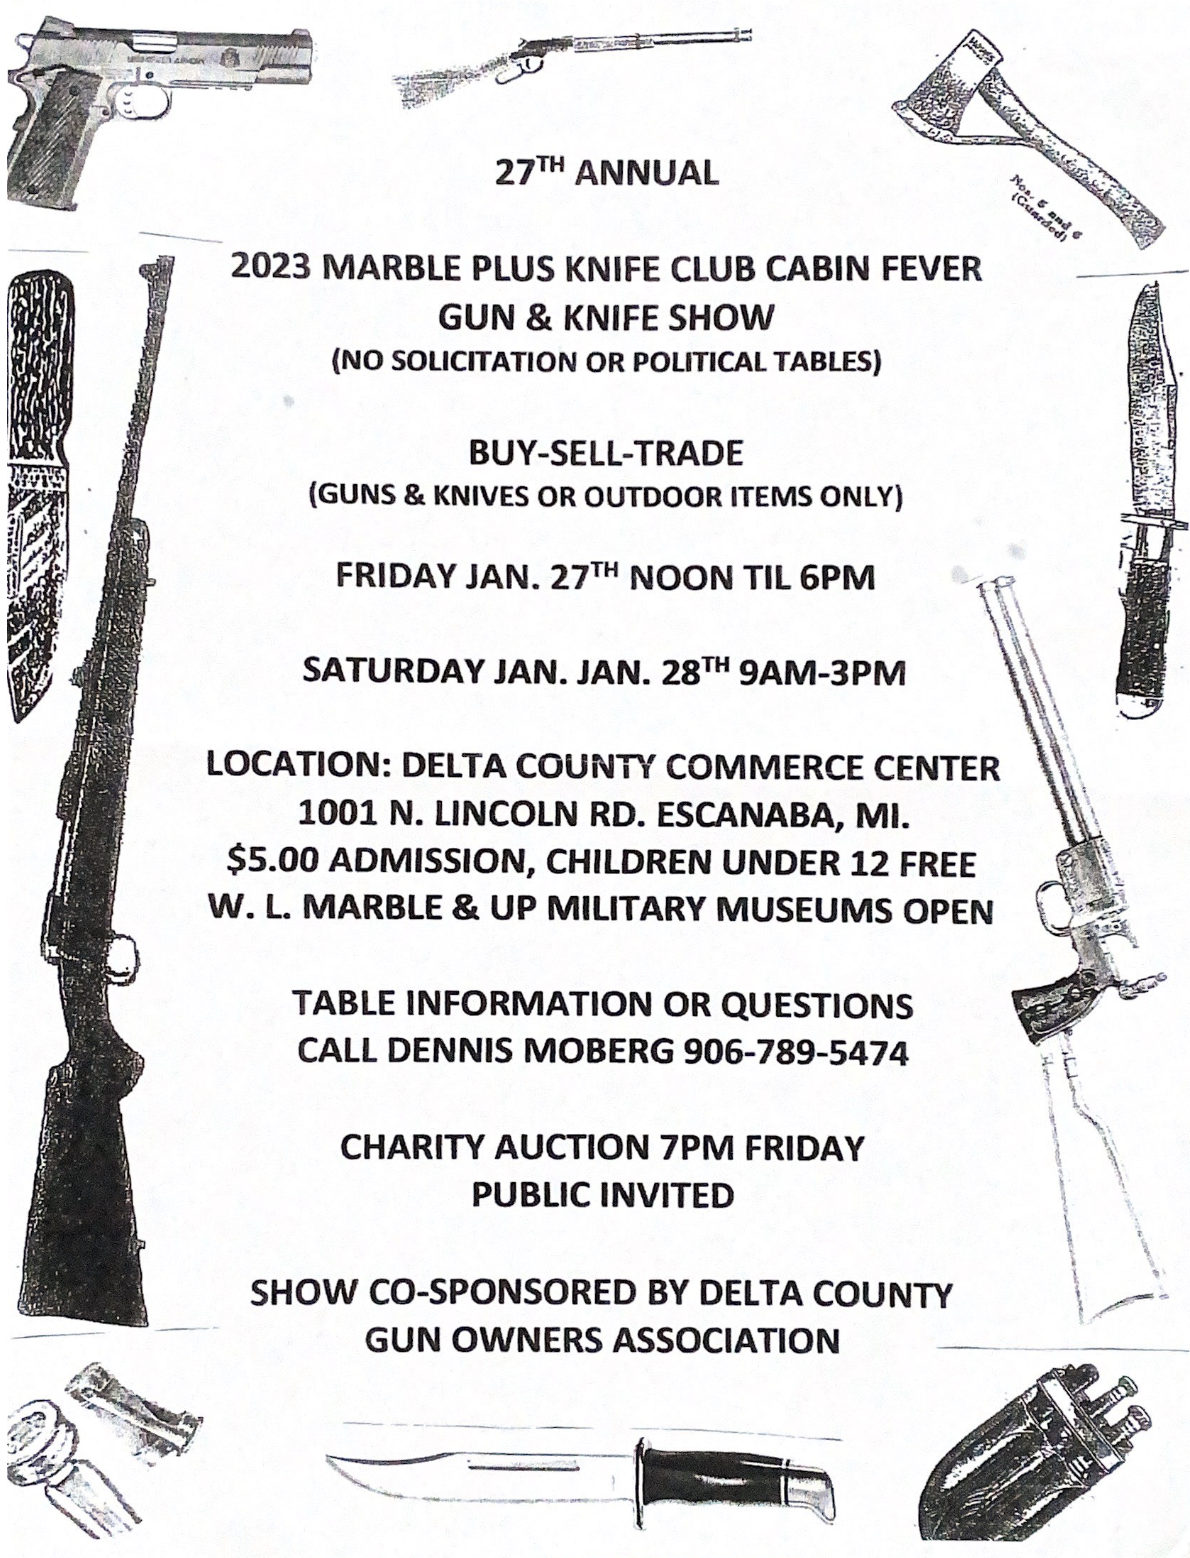 27th Annual Marble Cabin Fever Poster